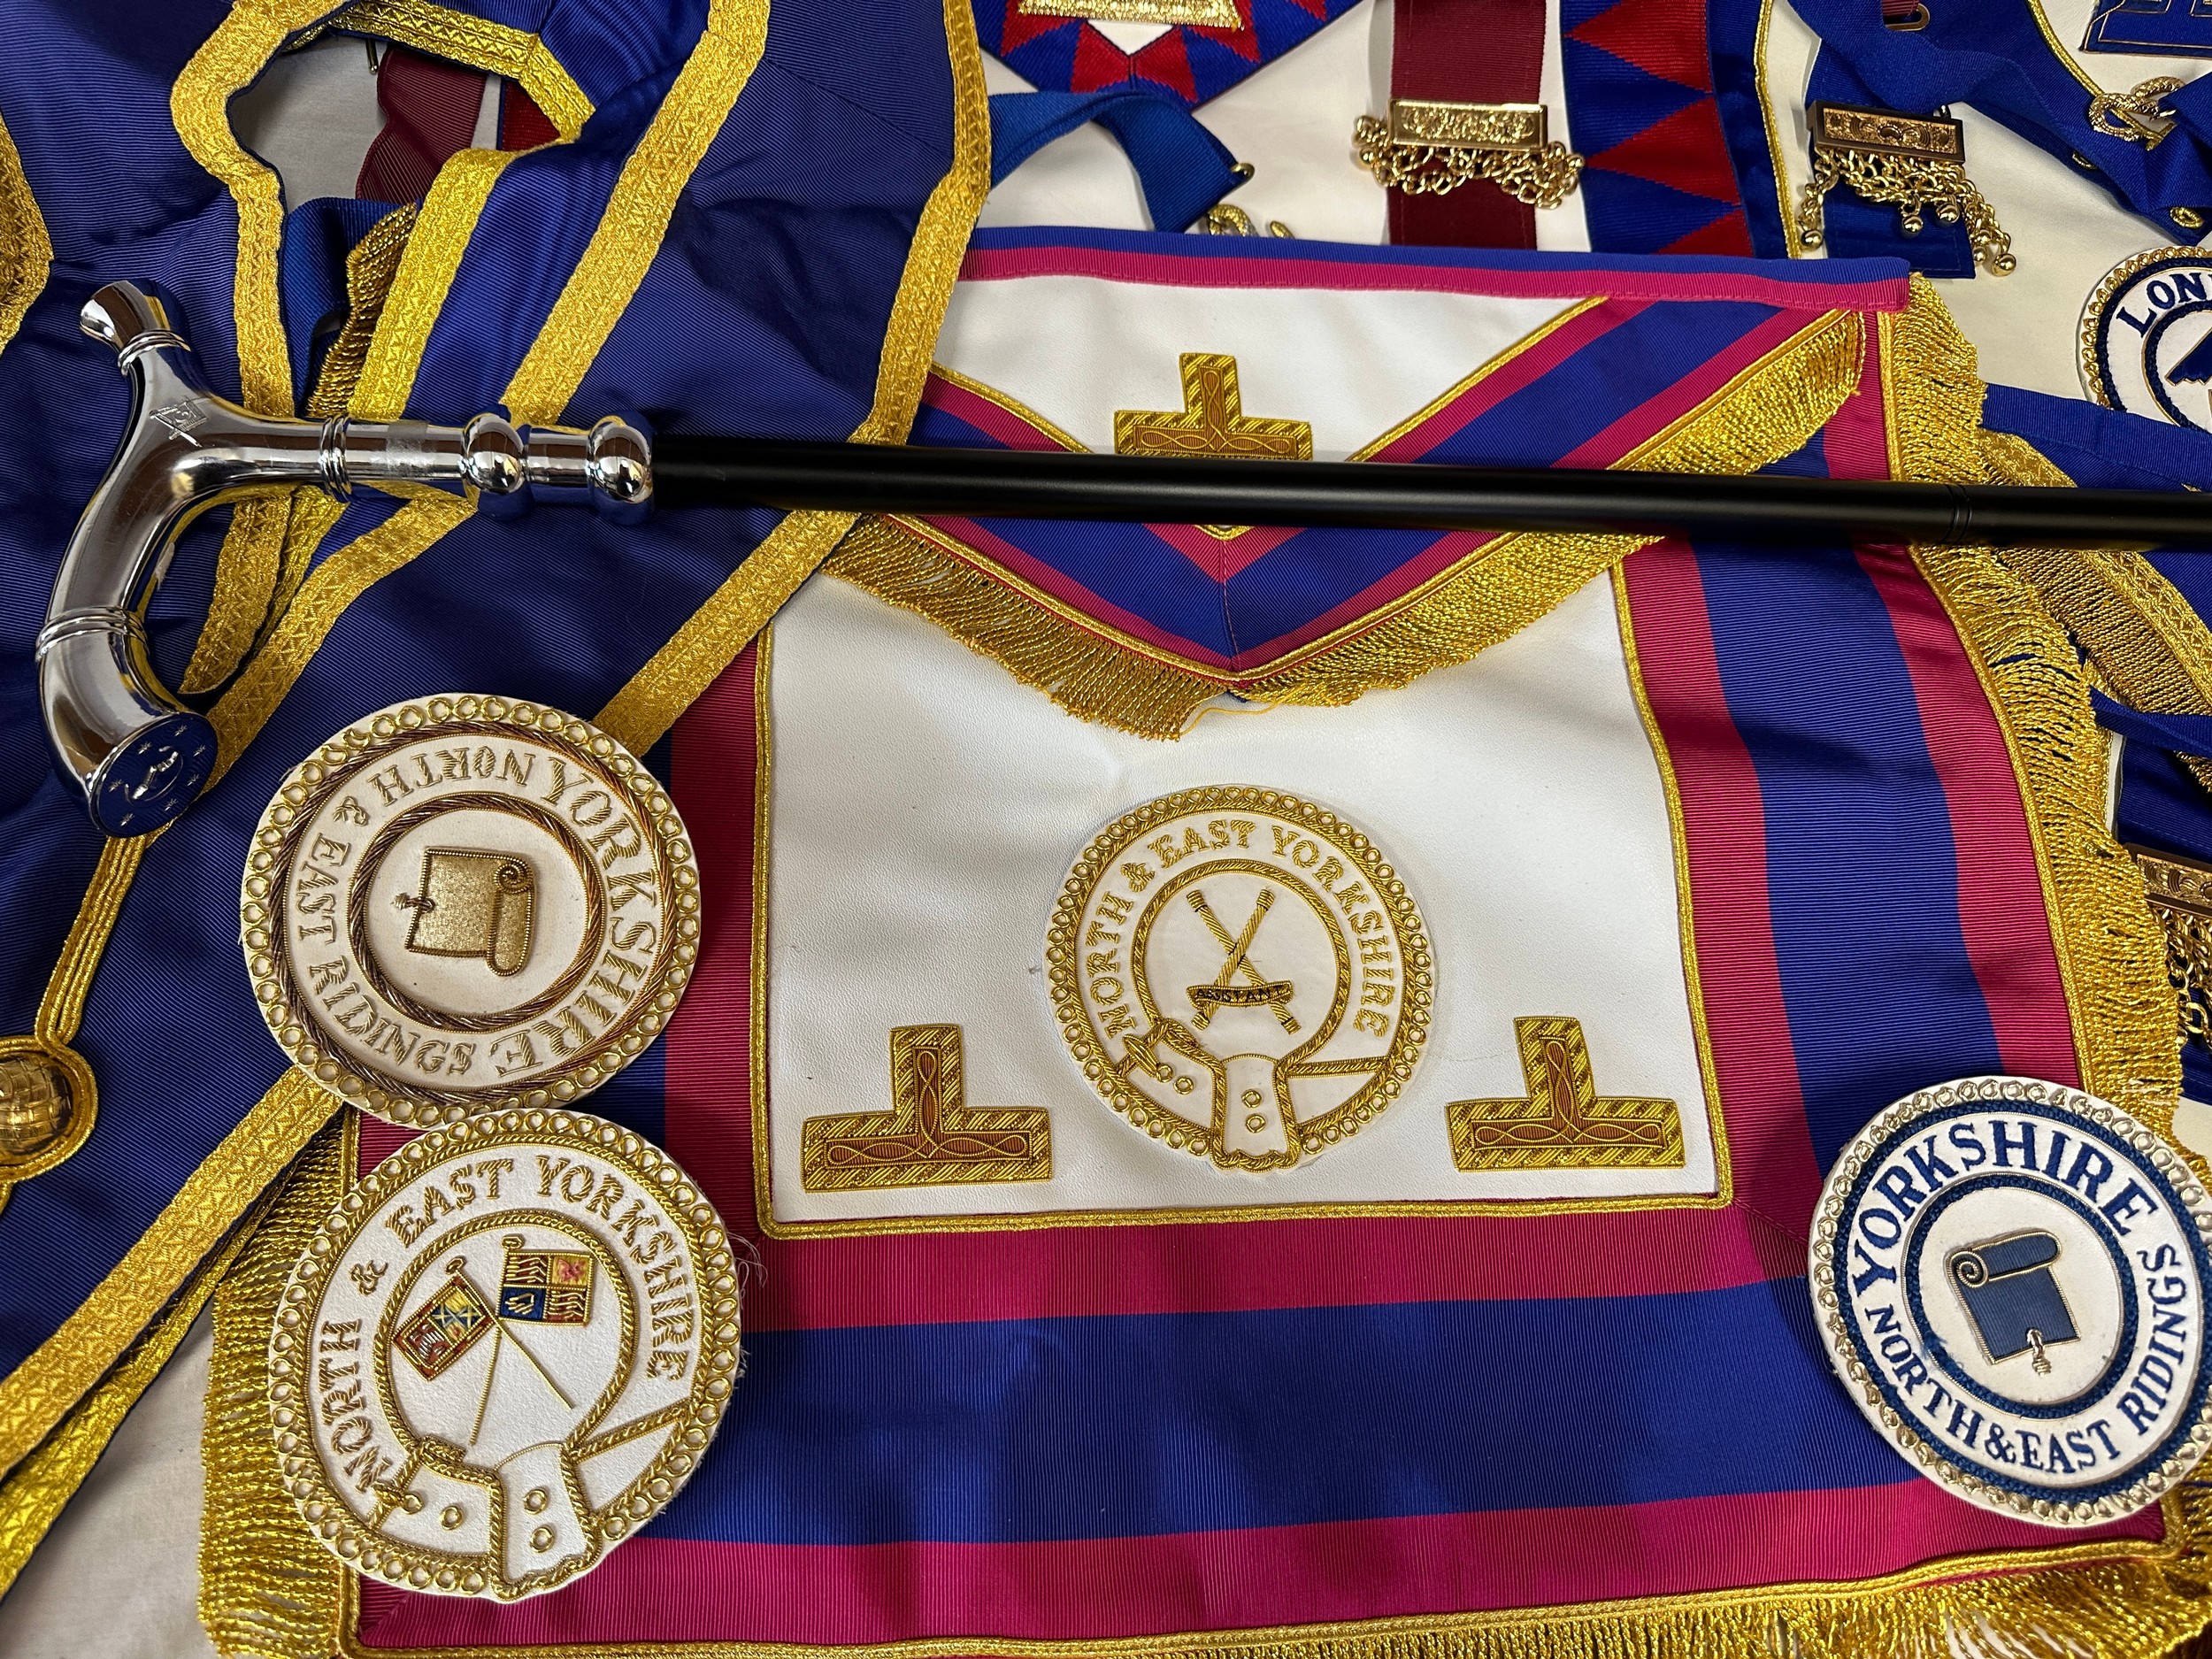 Quantity of masonic regalia to include medals, medallions, aprons, badges, sachets and walking - Image 7 of 7